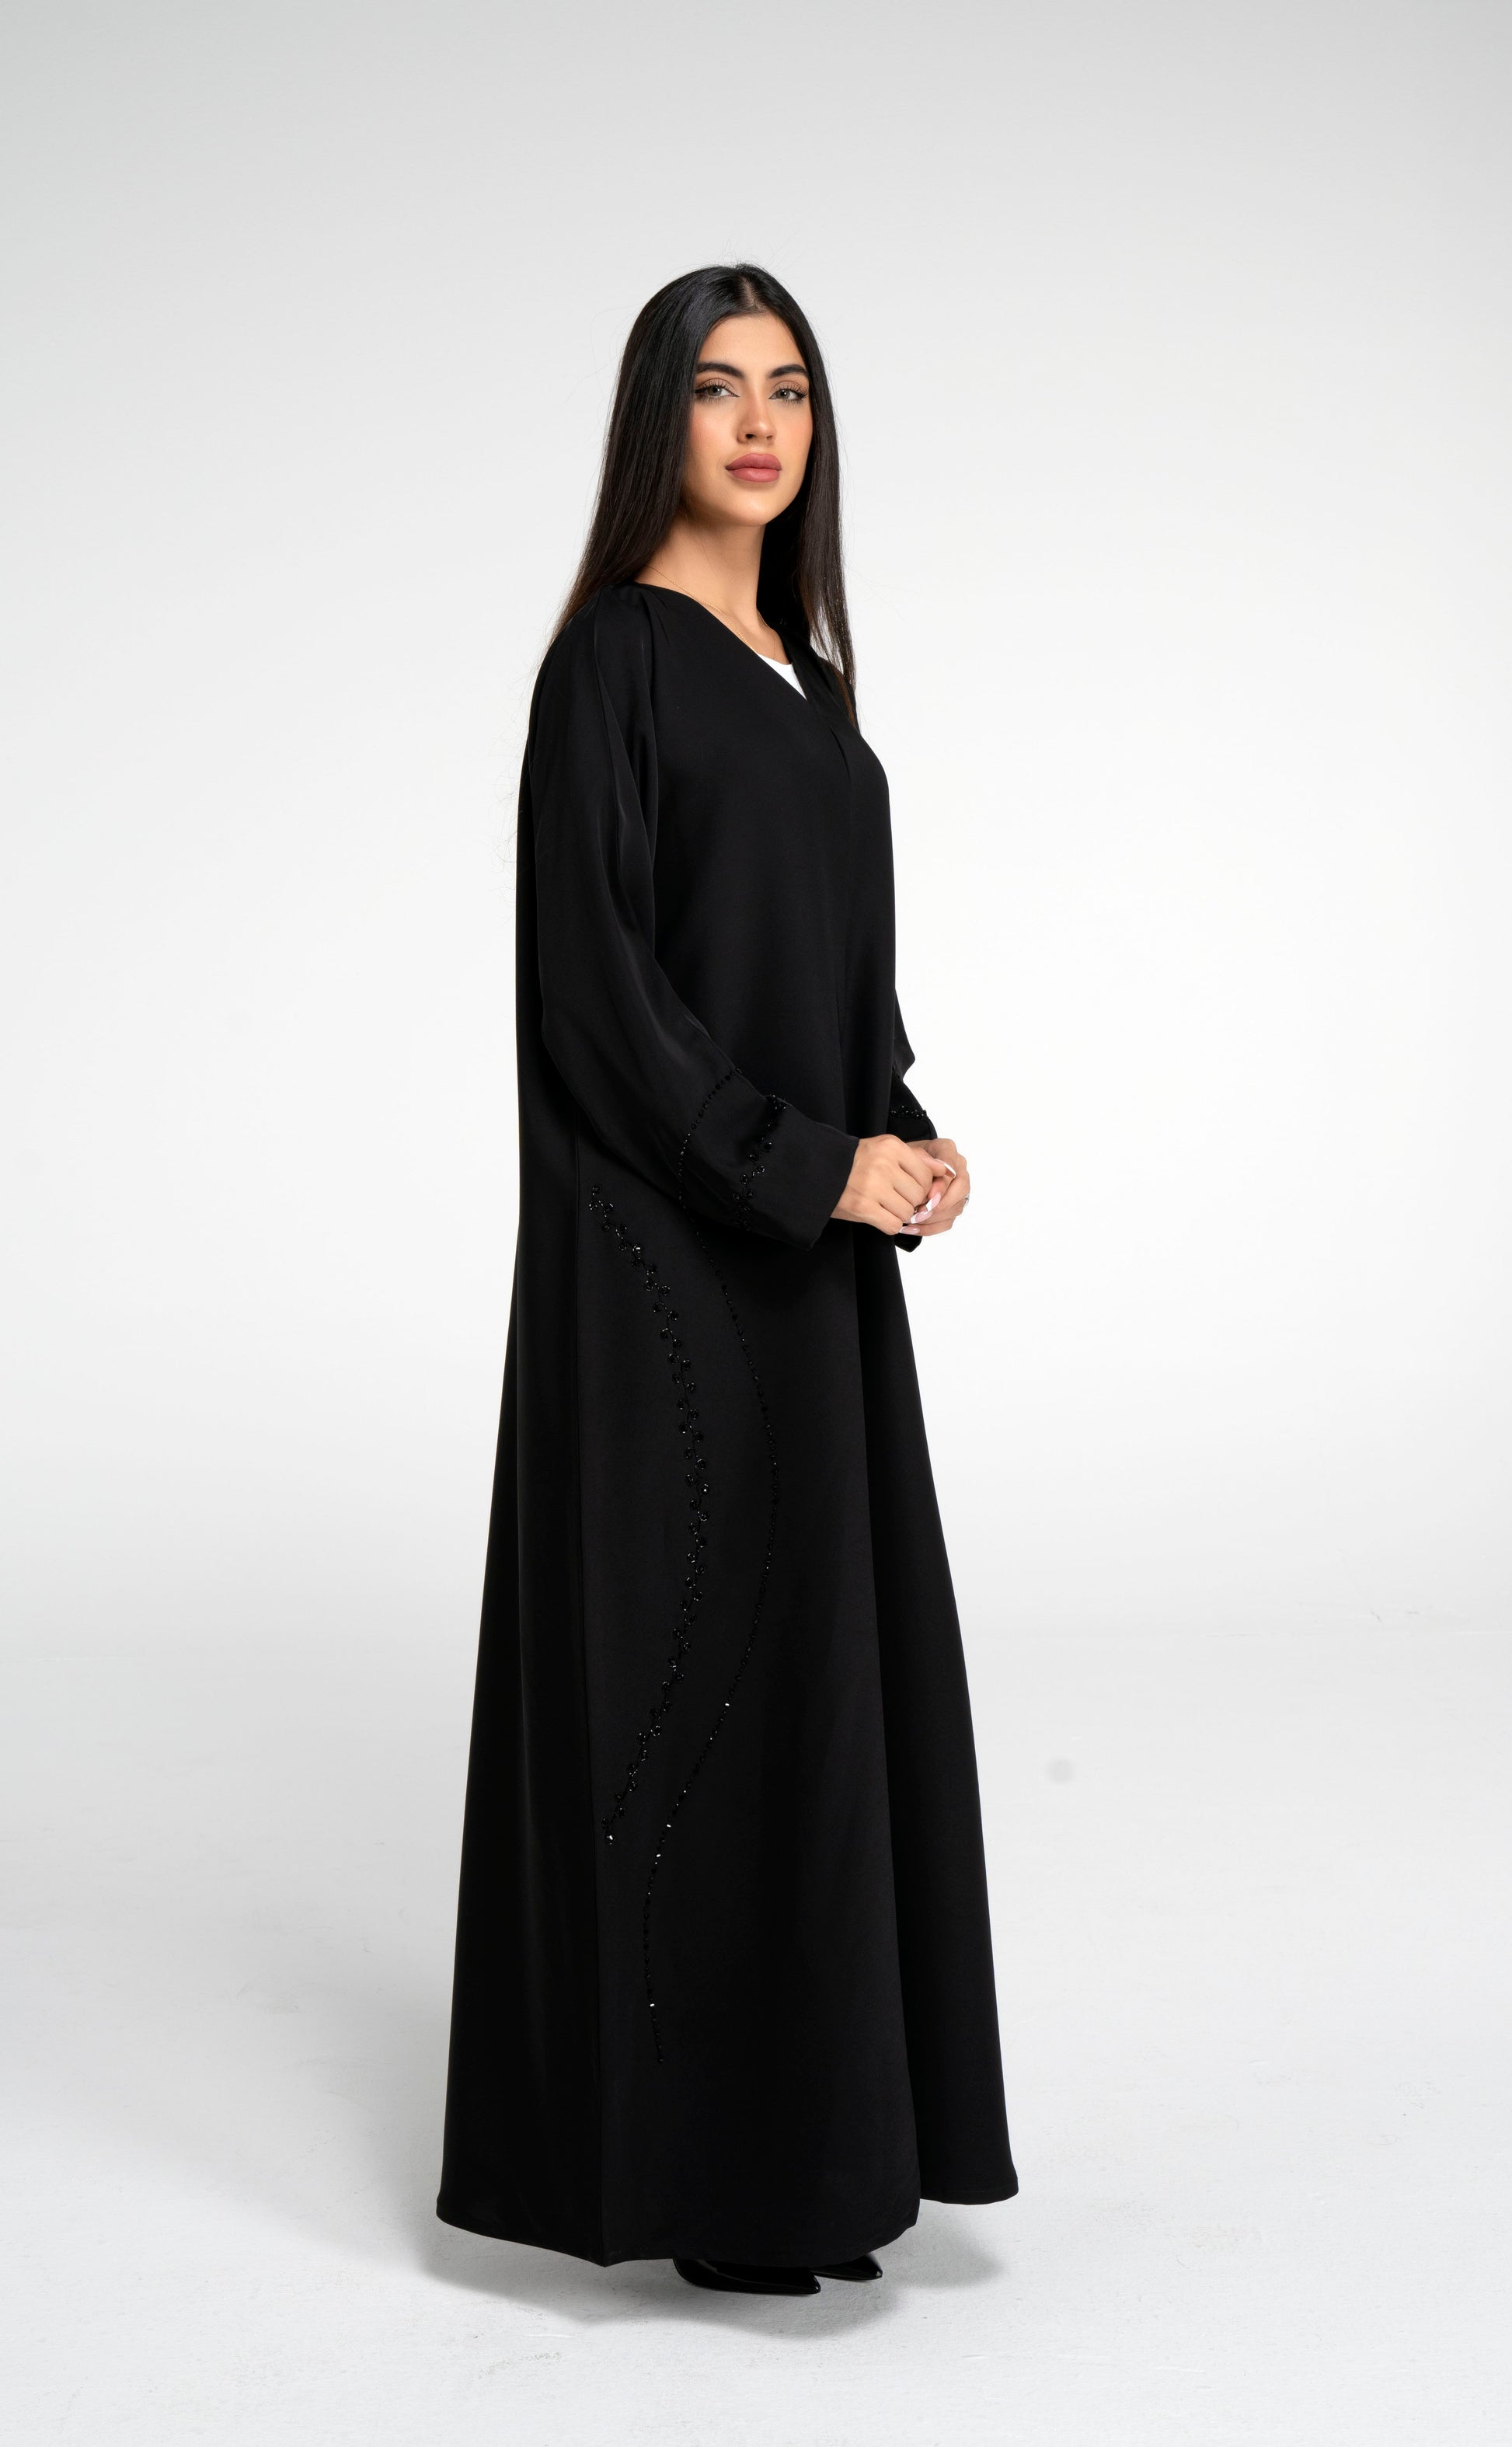 Side view of black abaya with curve design embellishment on front side and sleeve